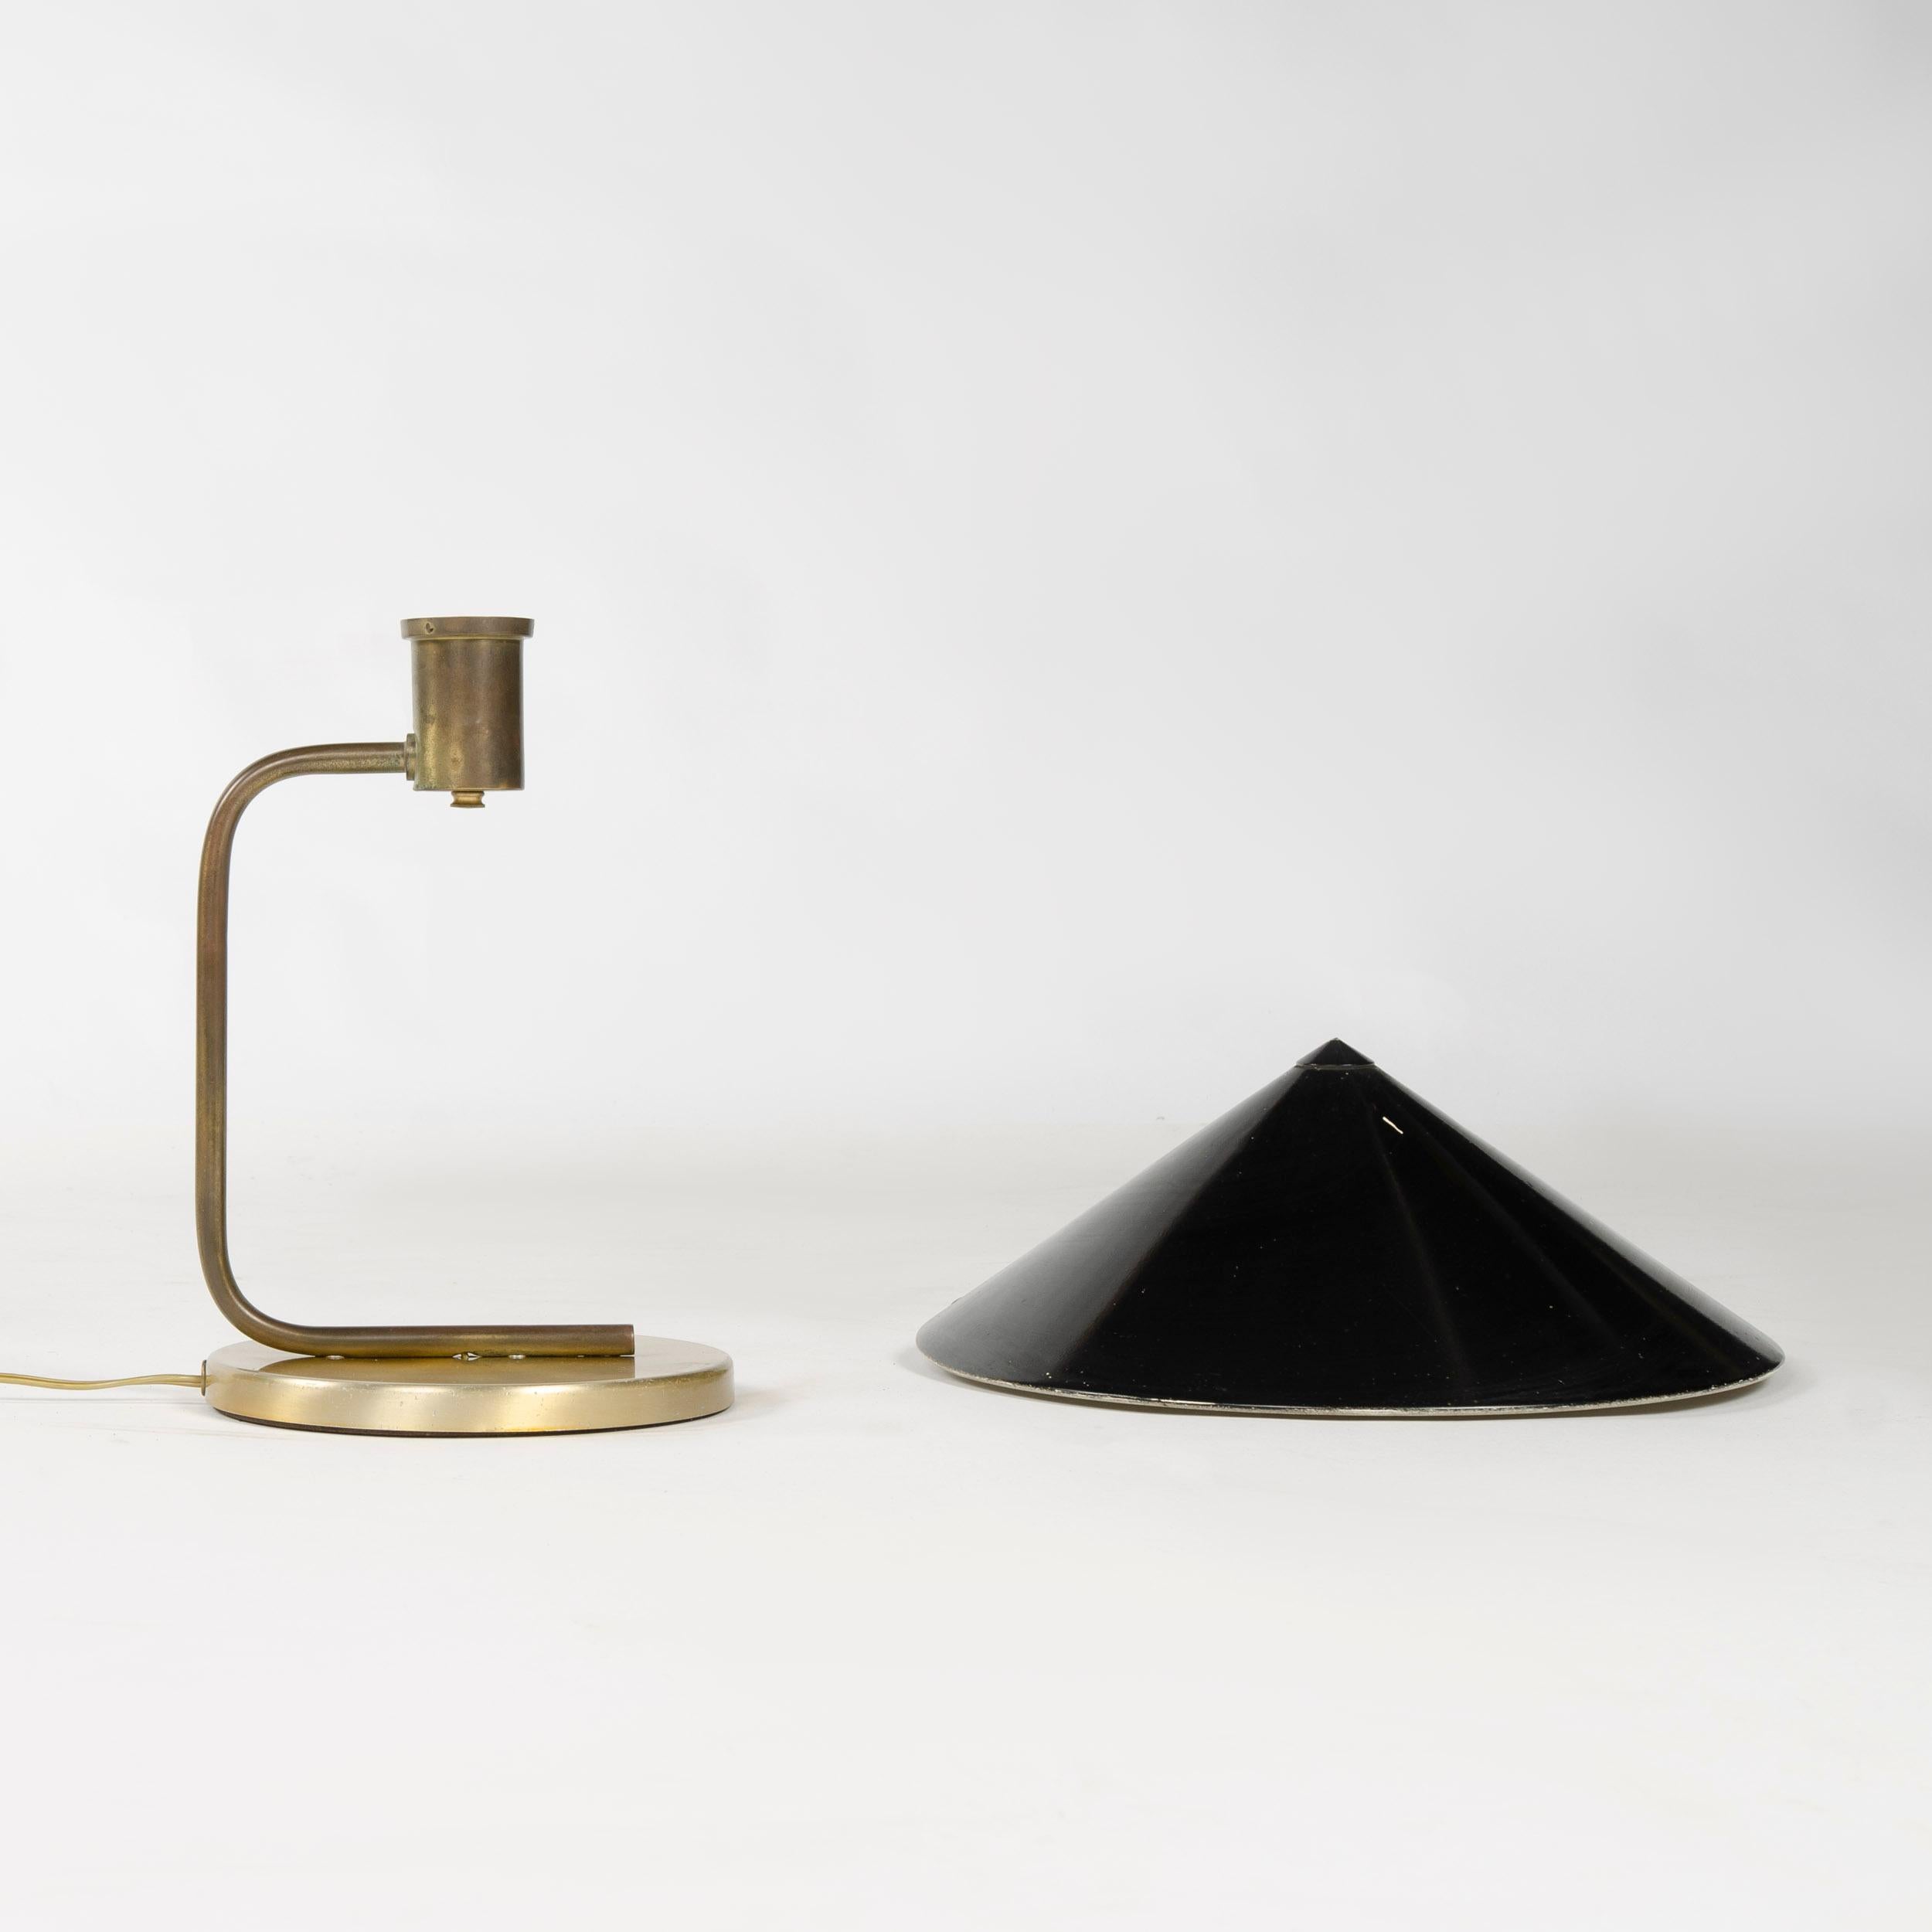 American 1950s Brass Desk Lamp with Black Enameled Conical Shade 